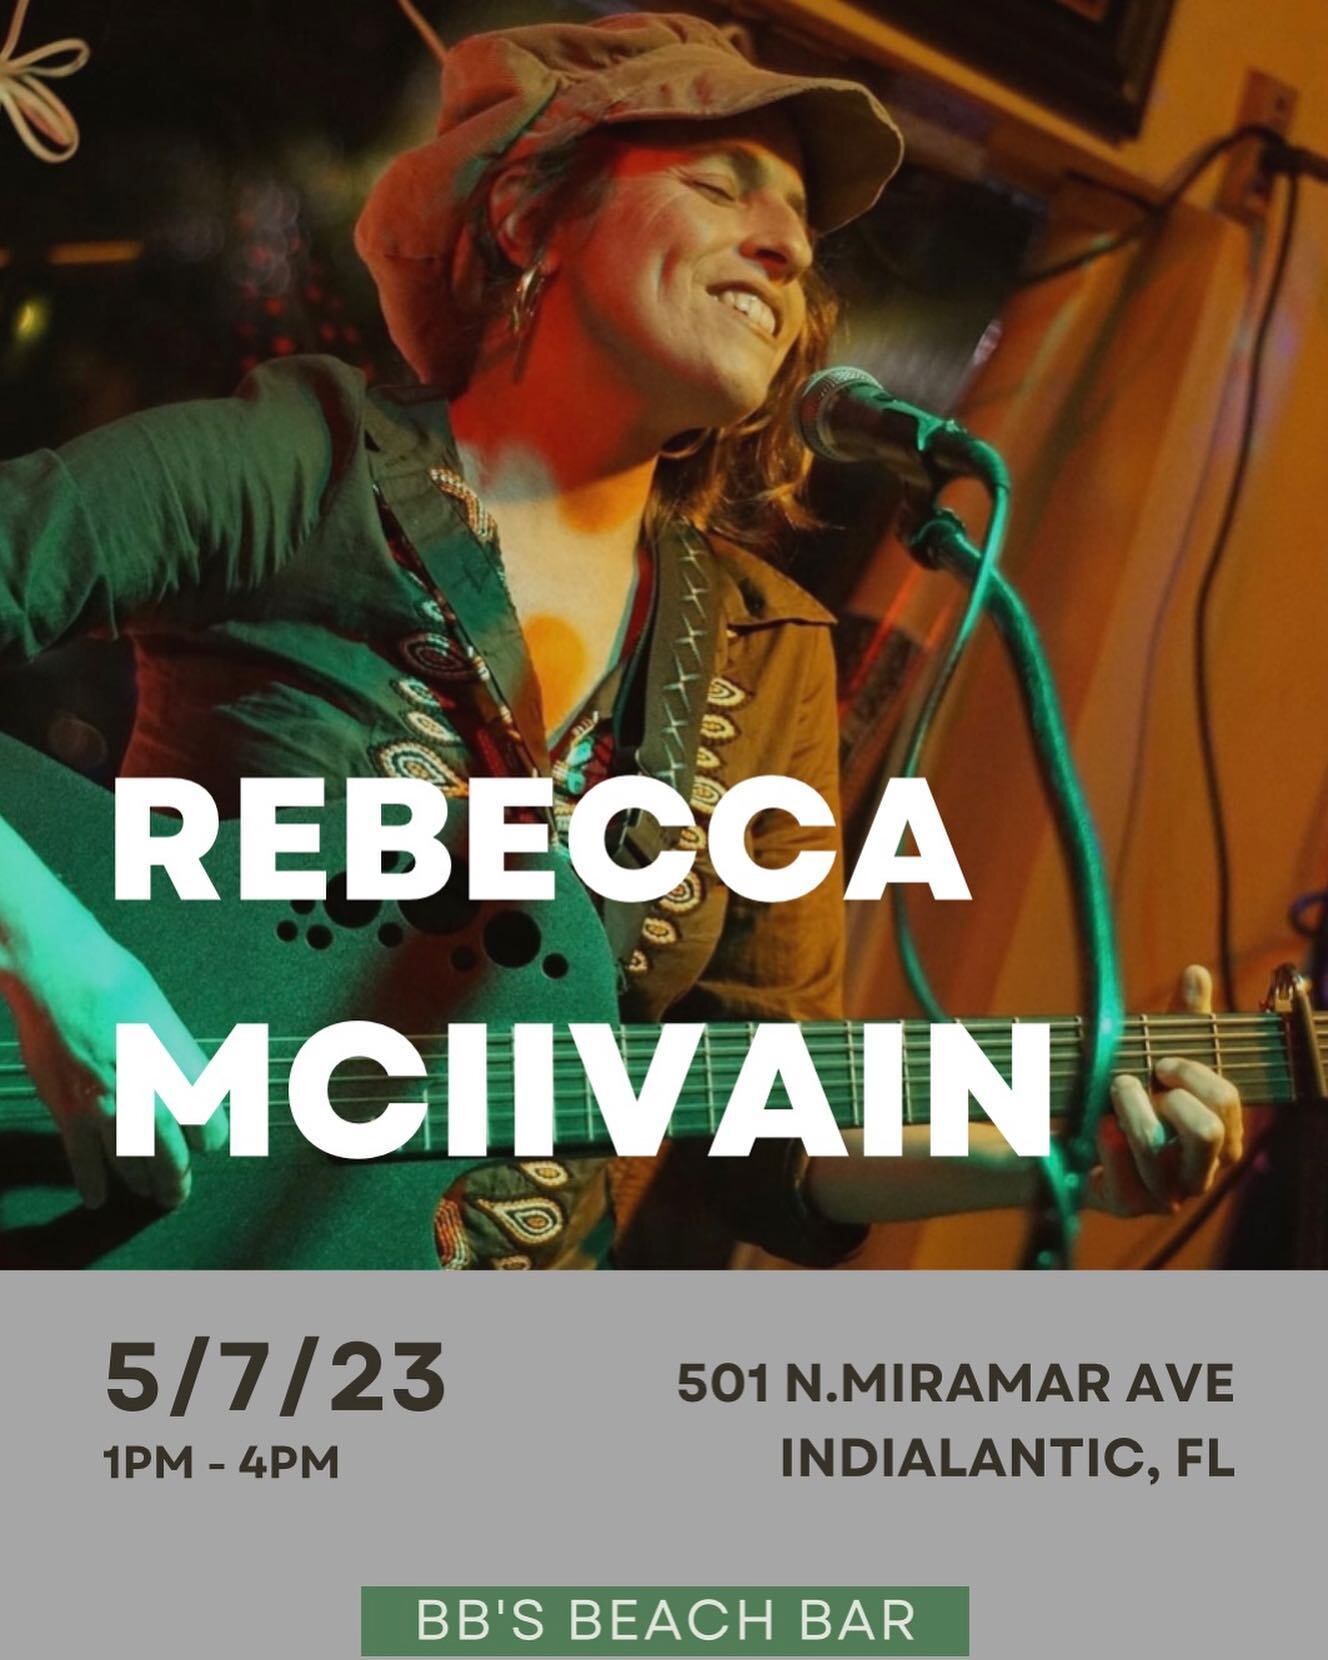 Happy Sunday Funday!
Today, BB&rsquo;s has the amazing Rebecca McIIvain singing for everyone from 1-4pm!
Sunday Morning Yoga with Giuliana at 10am!
And Brunch is served from 11am-2pm!
We&rsquo;ll see you on the beach!
☀️🎶🧘🏾🤙🏼🥂🍽️🌴